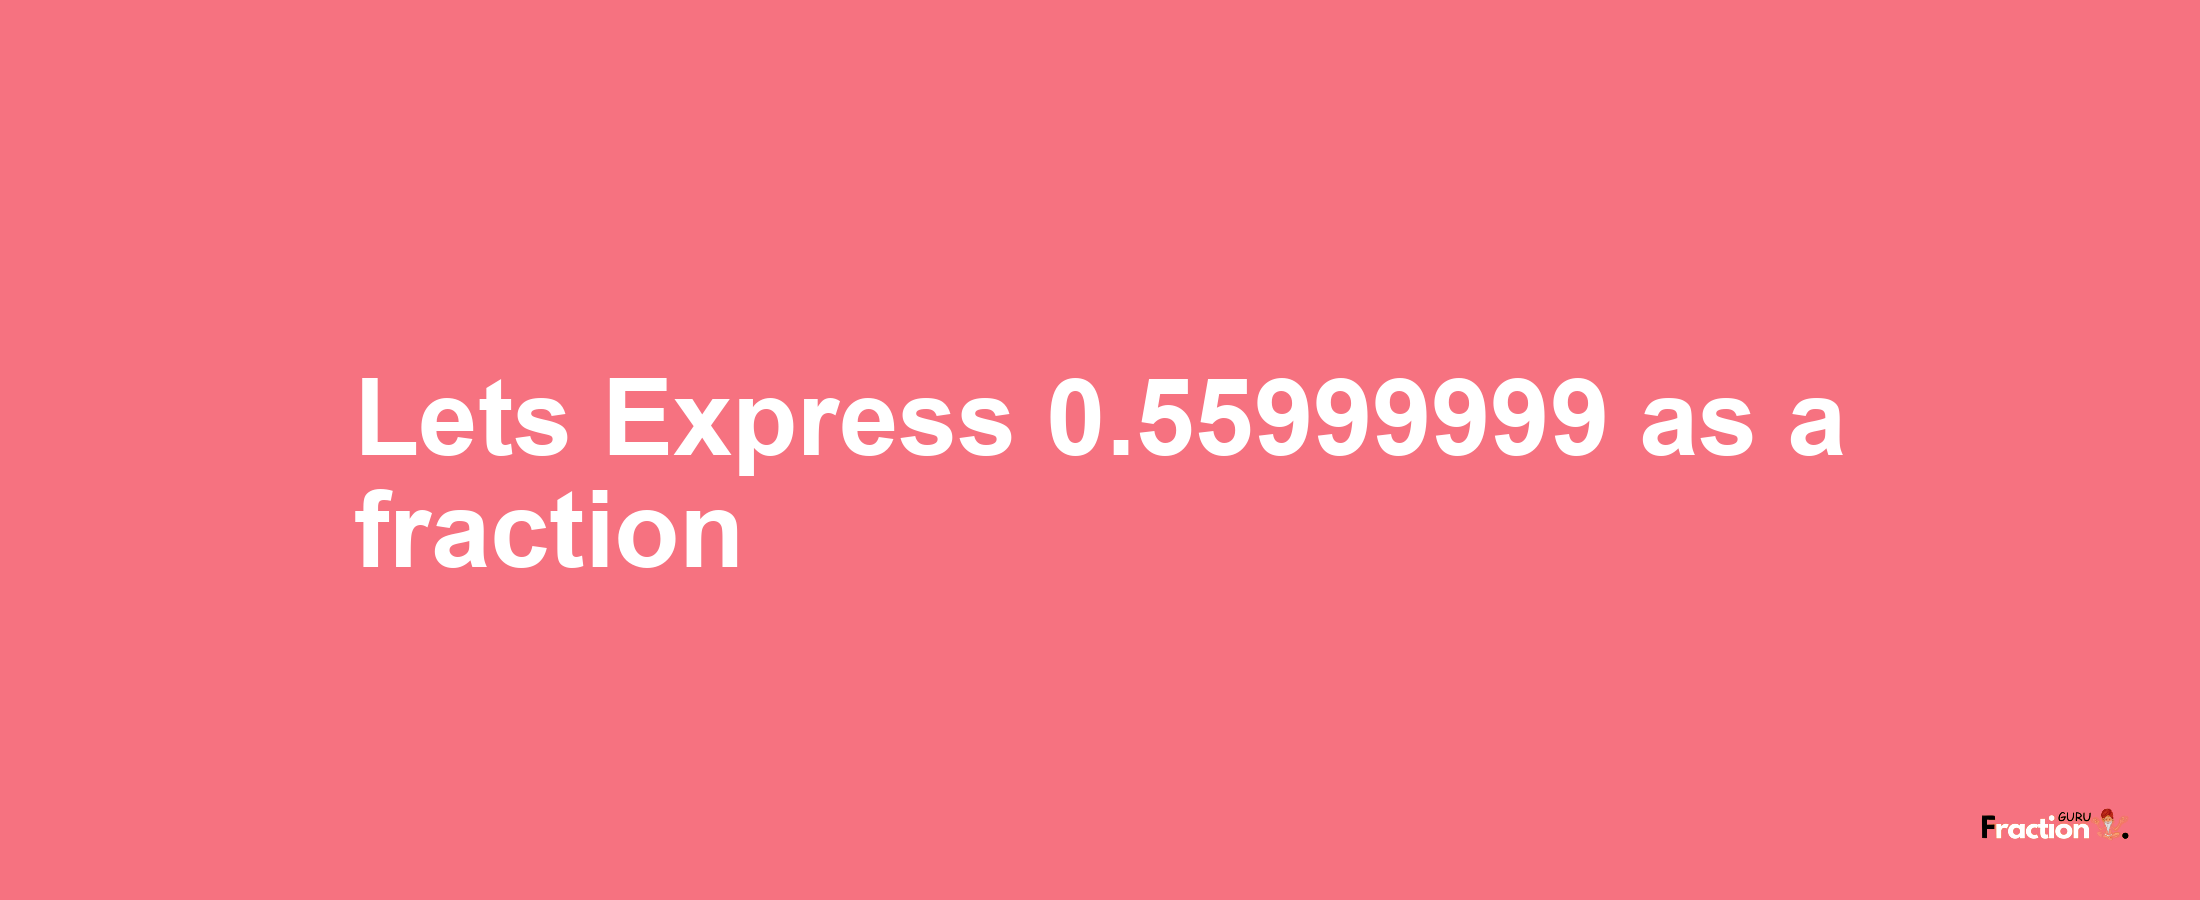 Lets Express 0.55999999 as afraction